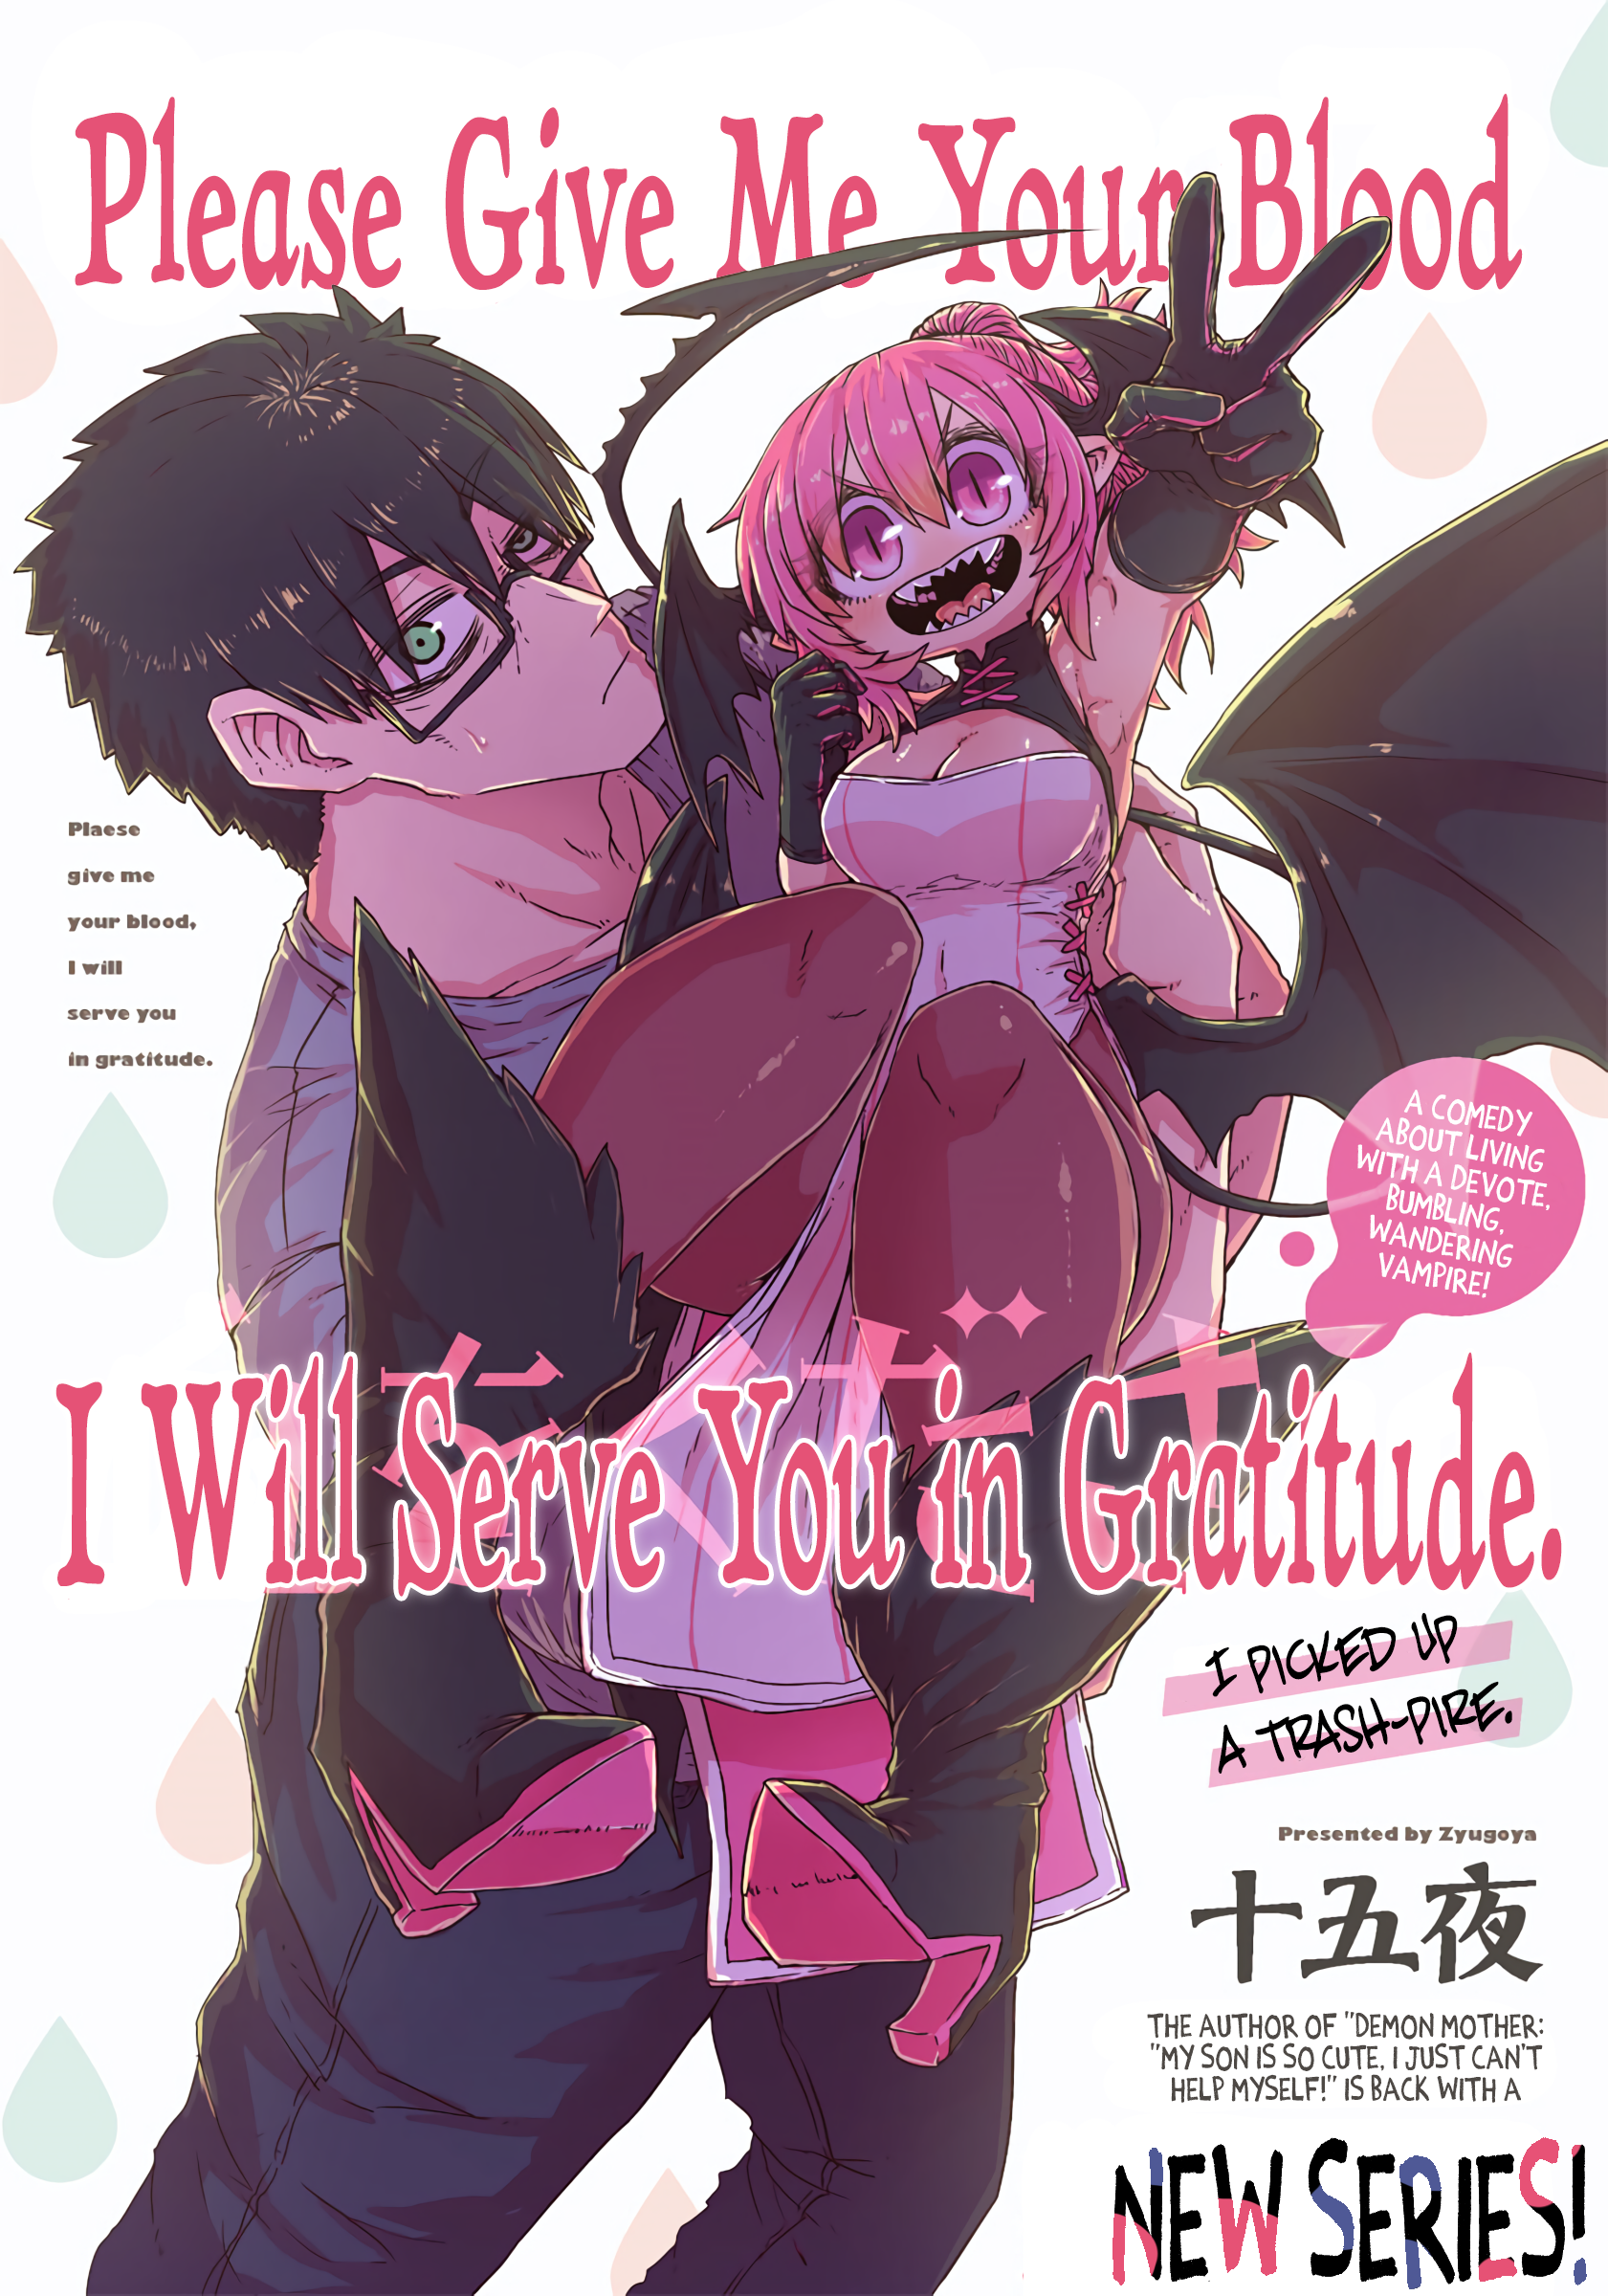 Please Give Me Your Blood, I Will Serve You in Gratitude manga